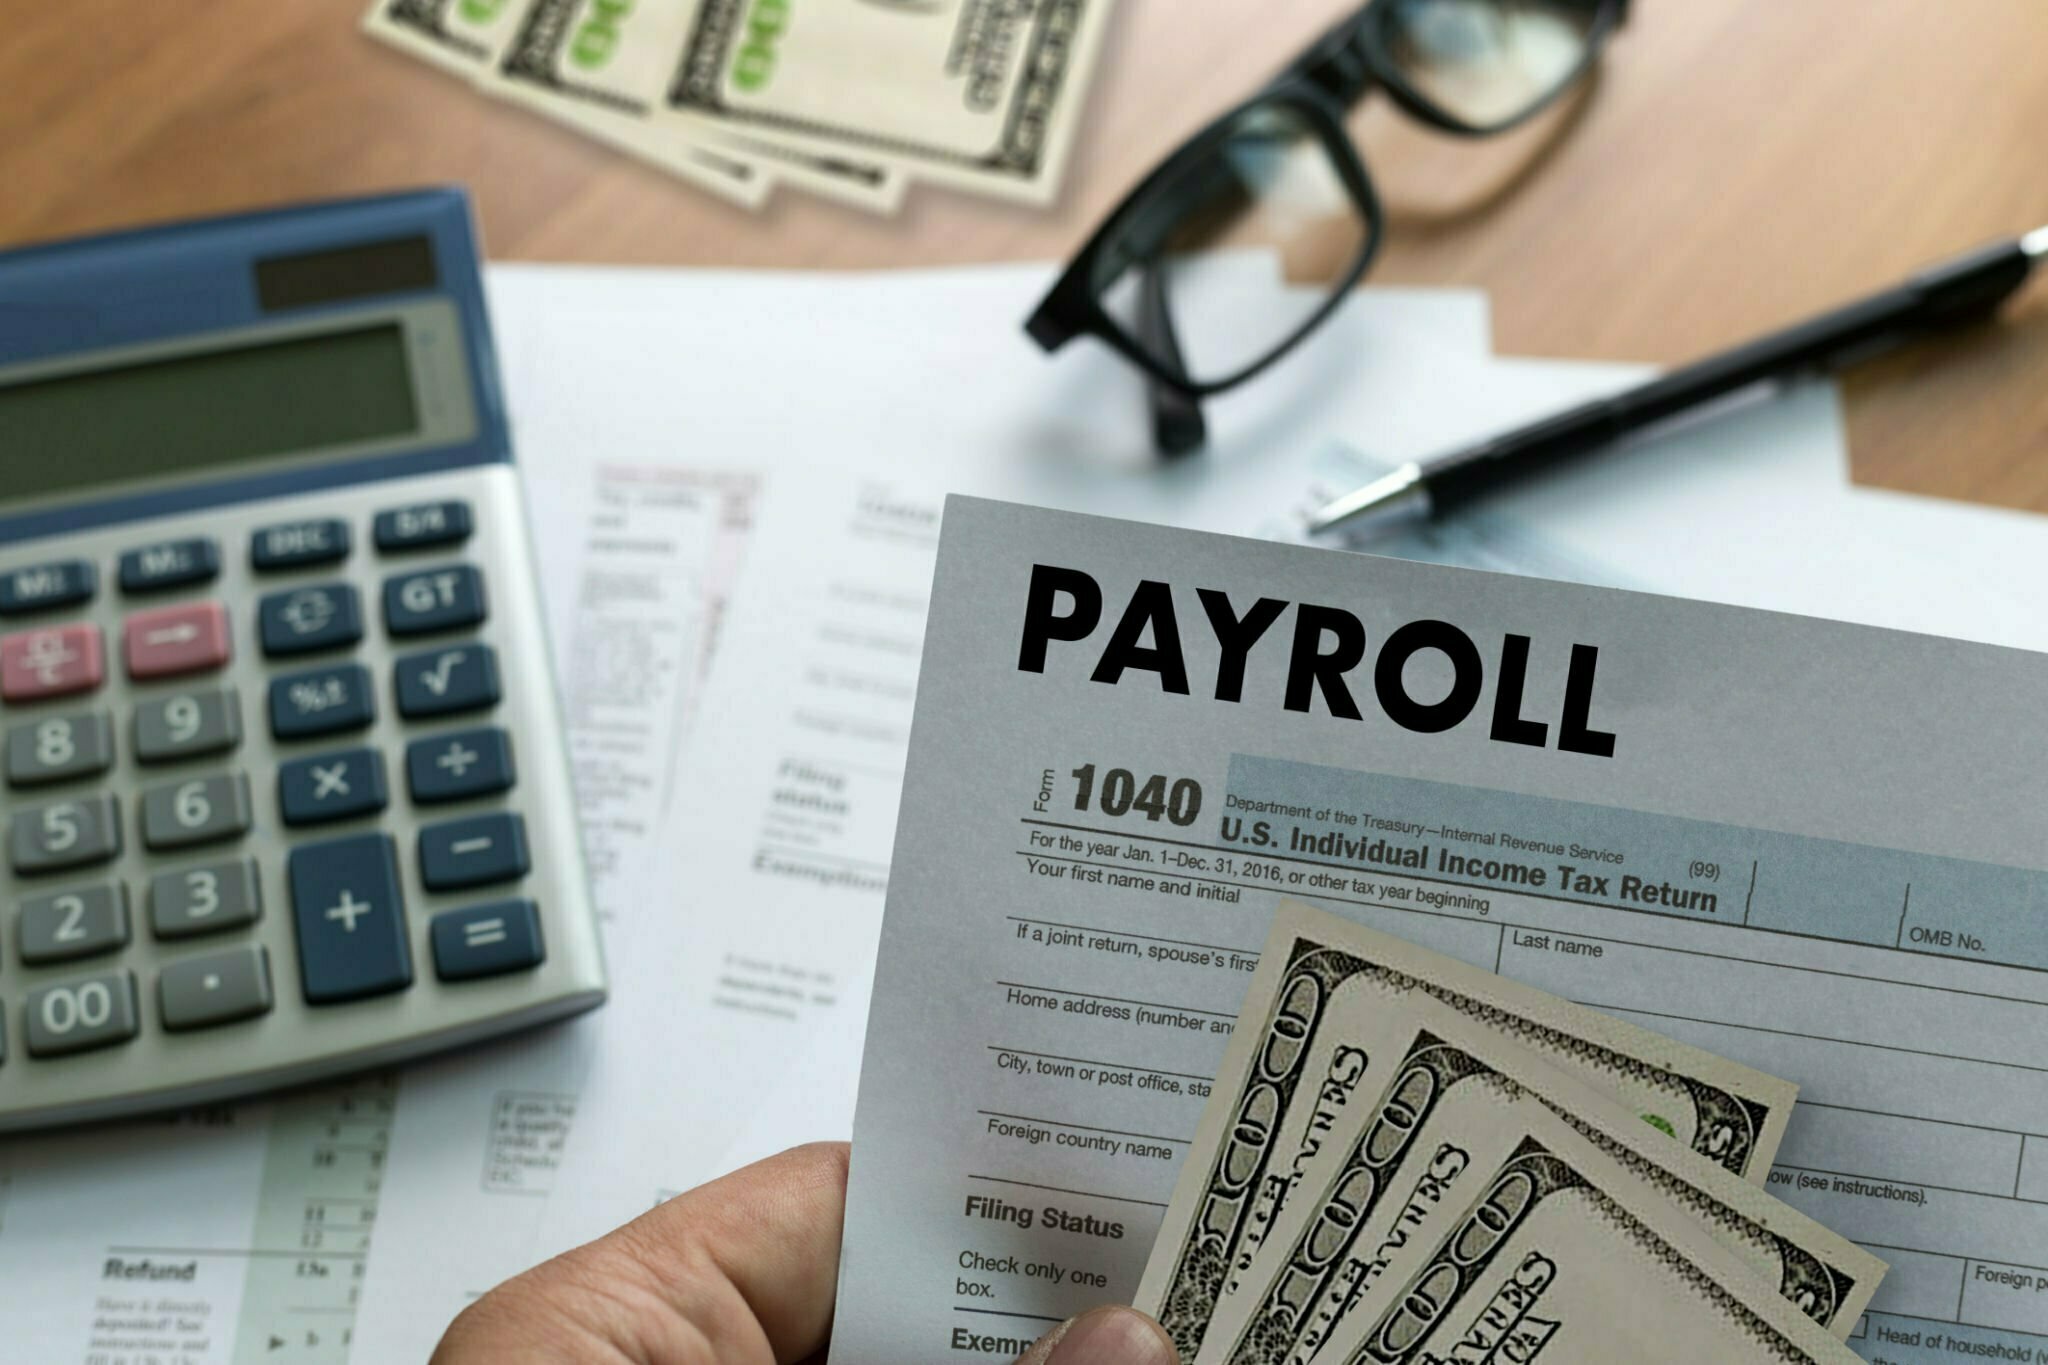 Payroll Software, Payroll Services, Online Payroll – What are the Differences?